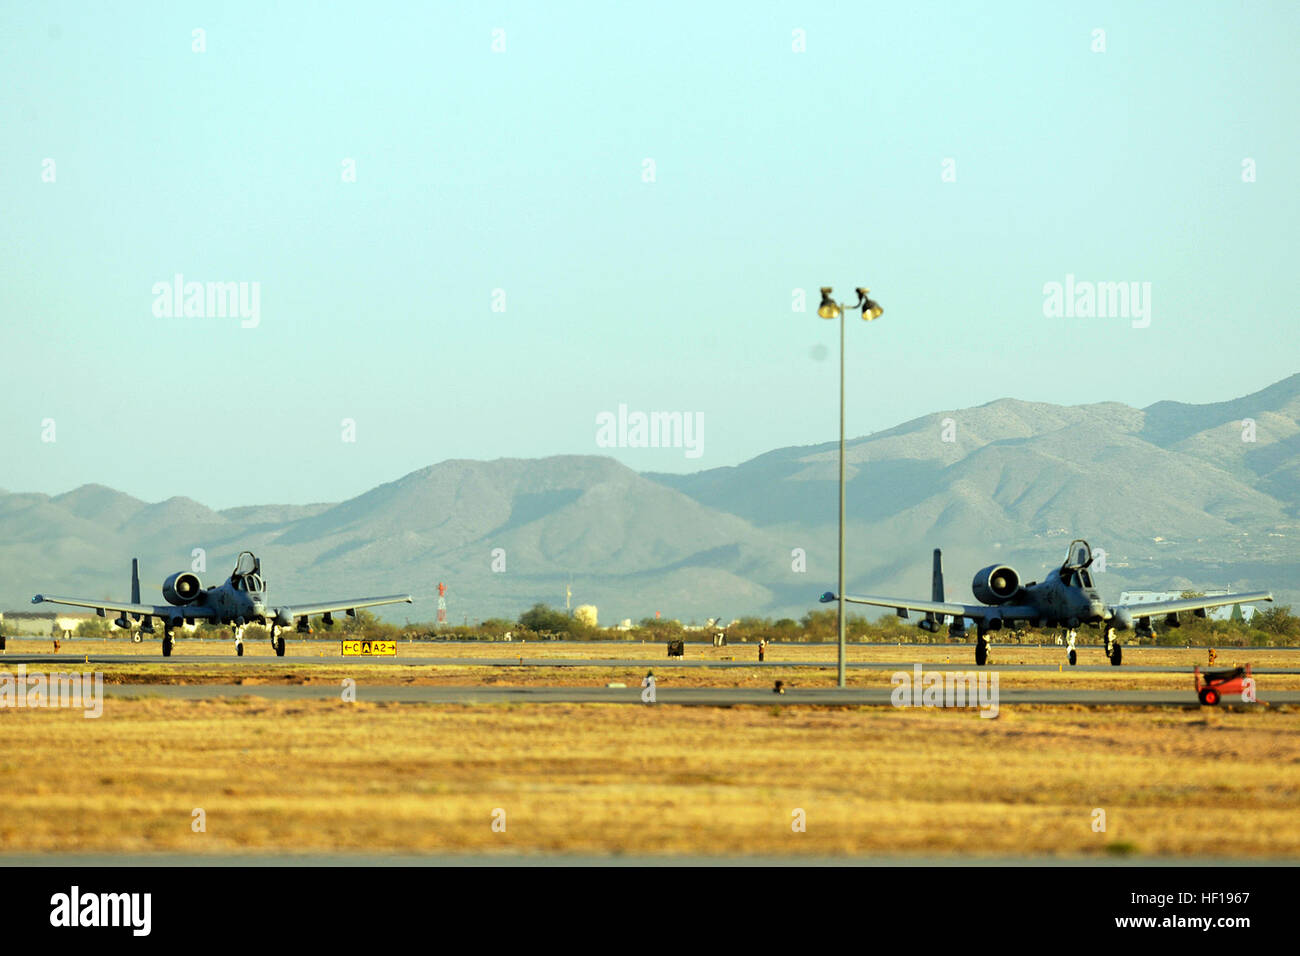 Two A-10 Thunderbolt II aircraft from Selfridge Air National Guard Base, Mich., flown by the 107th Fighter Squadron, taxi in after landing from flight operations during the Snowbird/Angel Thunder 2014 training mission at Davis-Monthan Air Force Base, Tucson, Ariz., May 12, 2014. Angel Thunder is the largest joint service, multinational, interagency combat search and rescue exercise, providing personnel recovery and combat search and rescue training for military units. (U.S. Air National Guard photo by MSgt. David Kujawa/Released) Angel Thunder 140512-Z-EZ686-067 Stock Photo